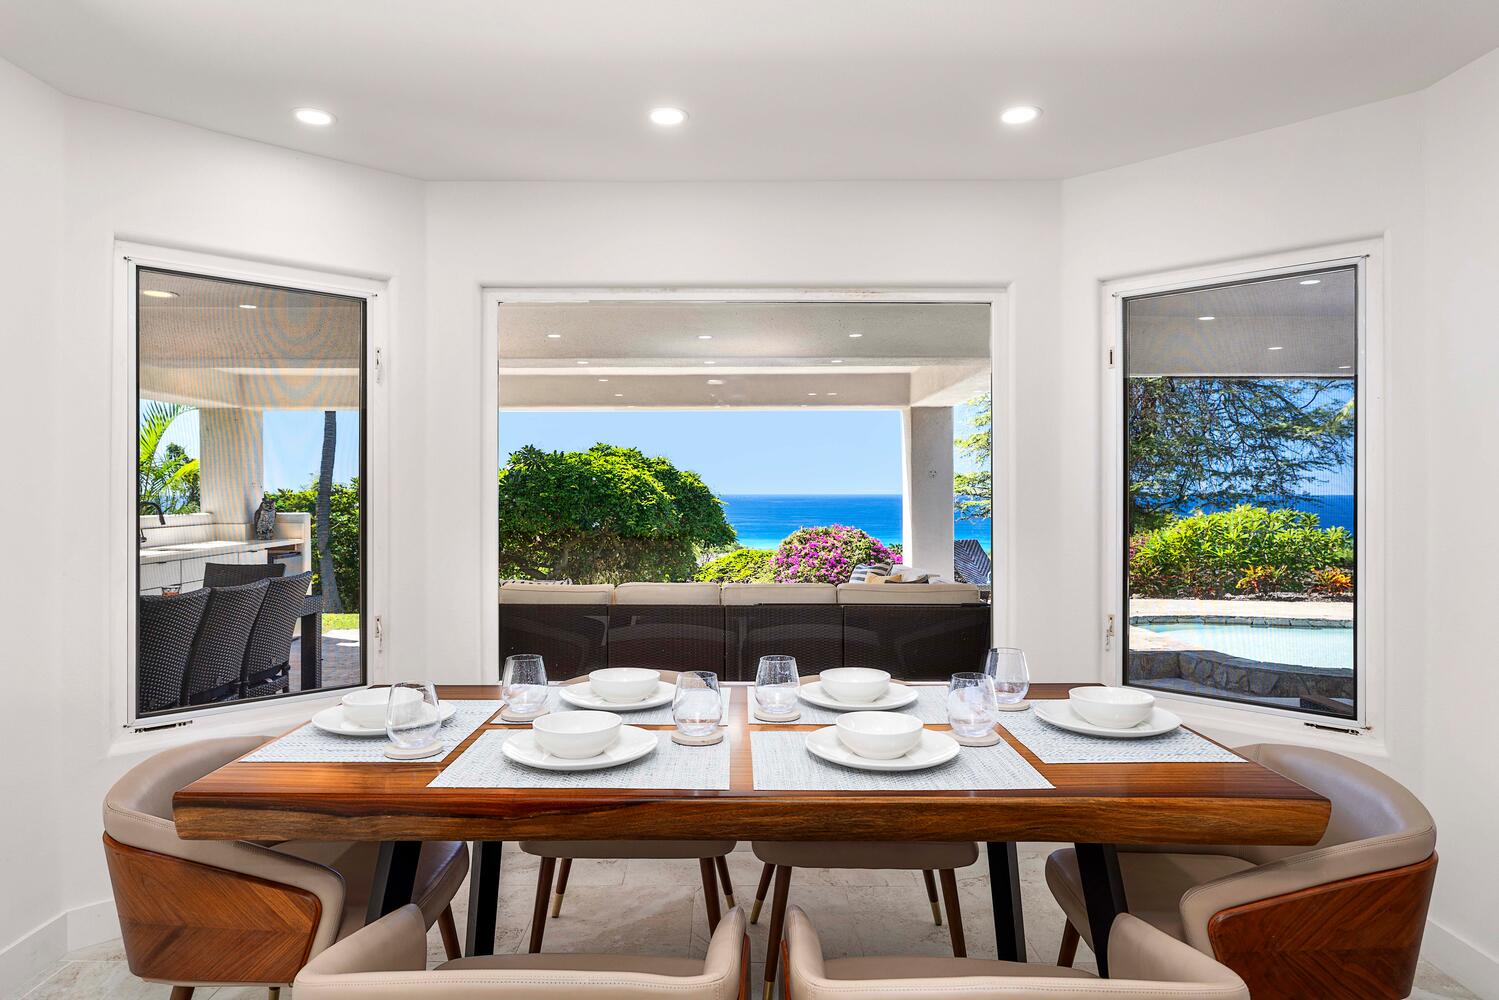 Kailua Kona Vacation Rentals, Ho'okipa Hale - Gather around the six-seater dining table for memorable meals and conversations.